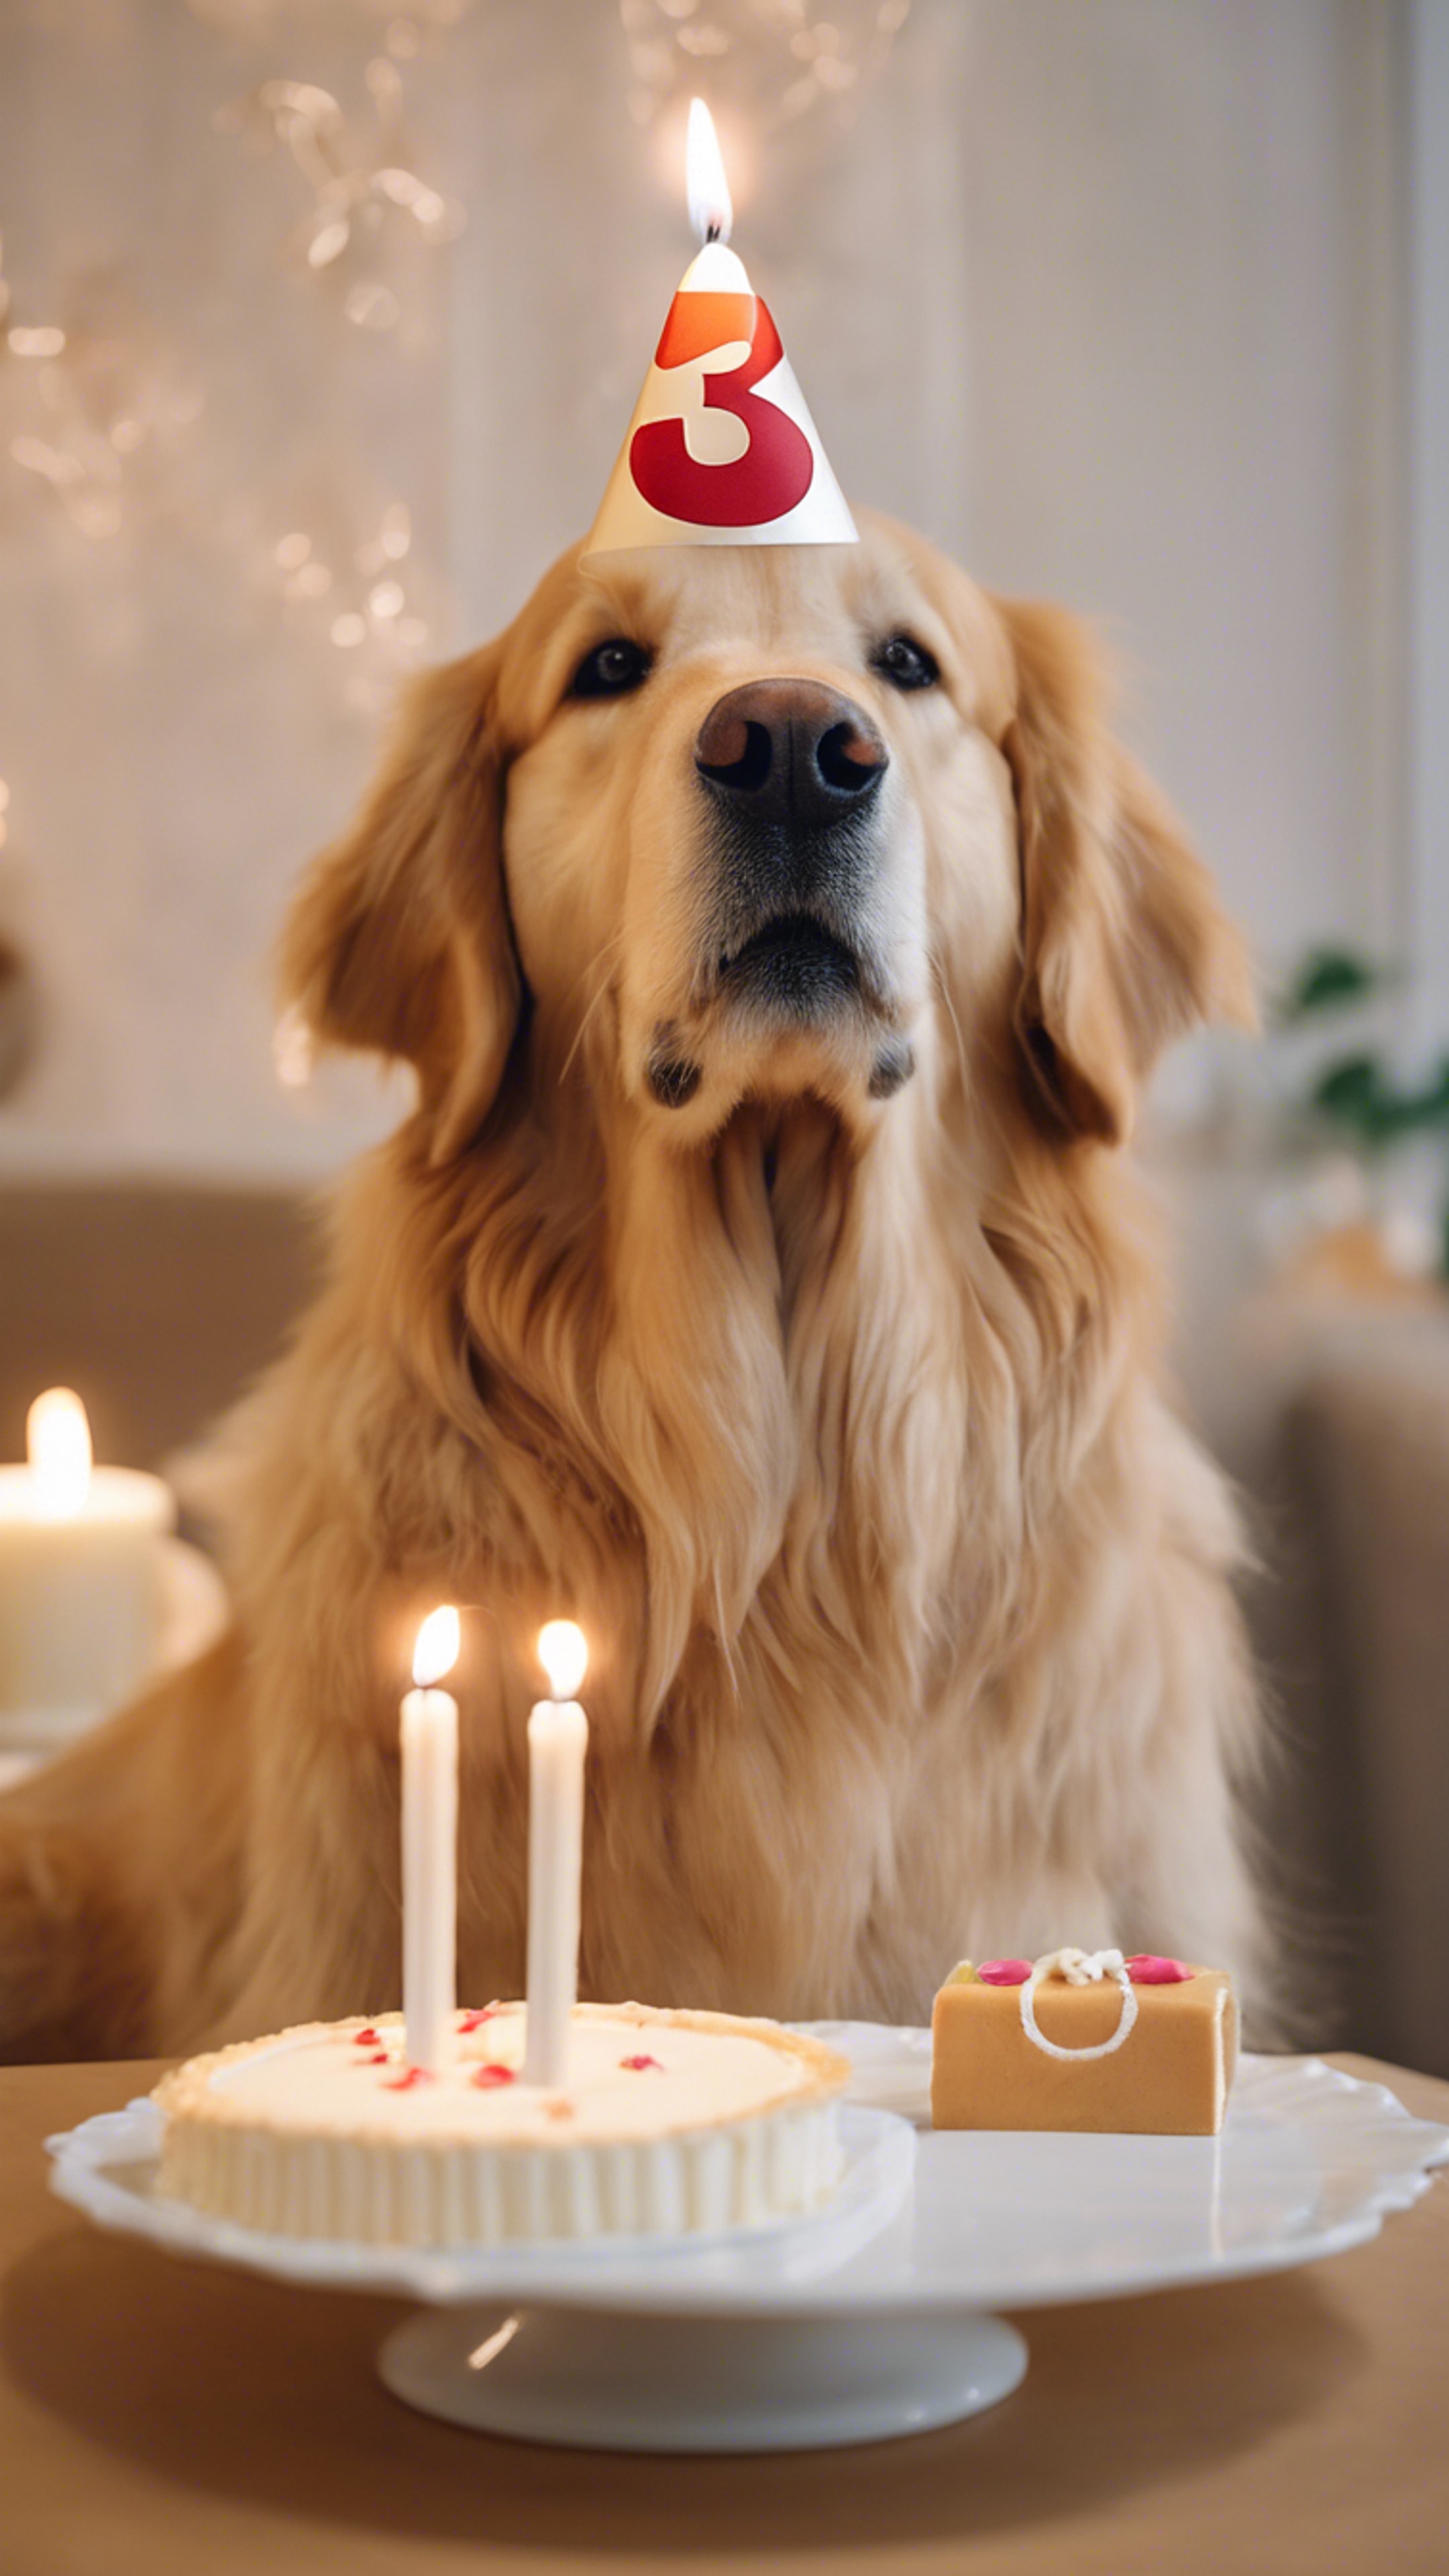 A golden retriever wearing a birthday hat, sitting in front of a numbered '3' candle on a small cake, looking eagerly at the camera. Hình nền[271fe240b95e4af1b864]